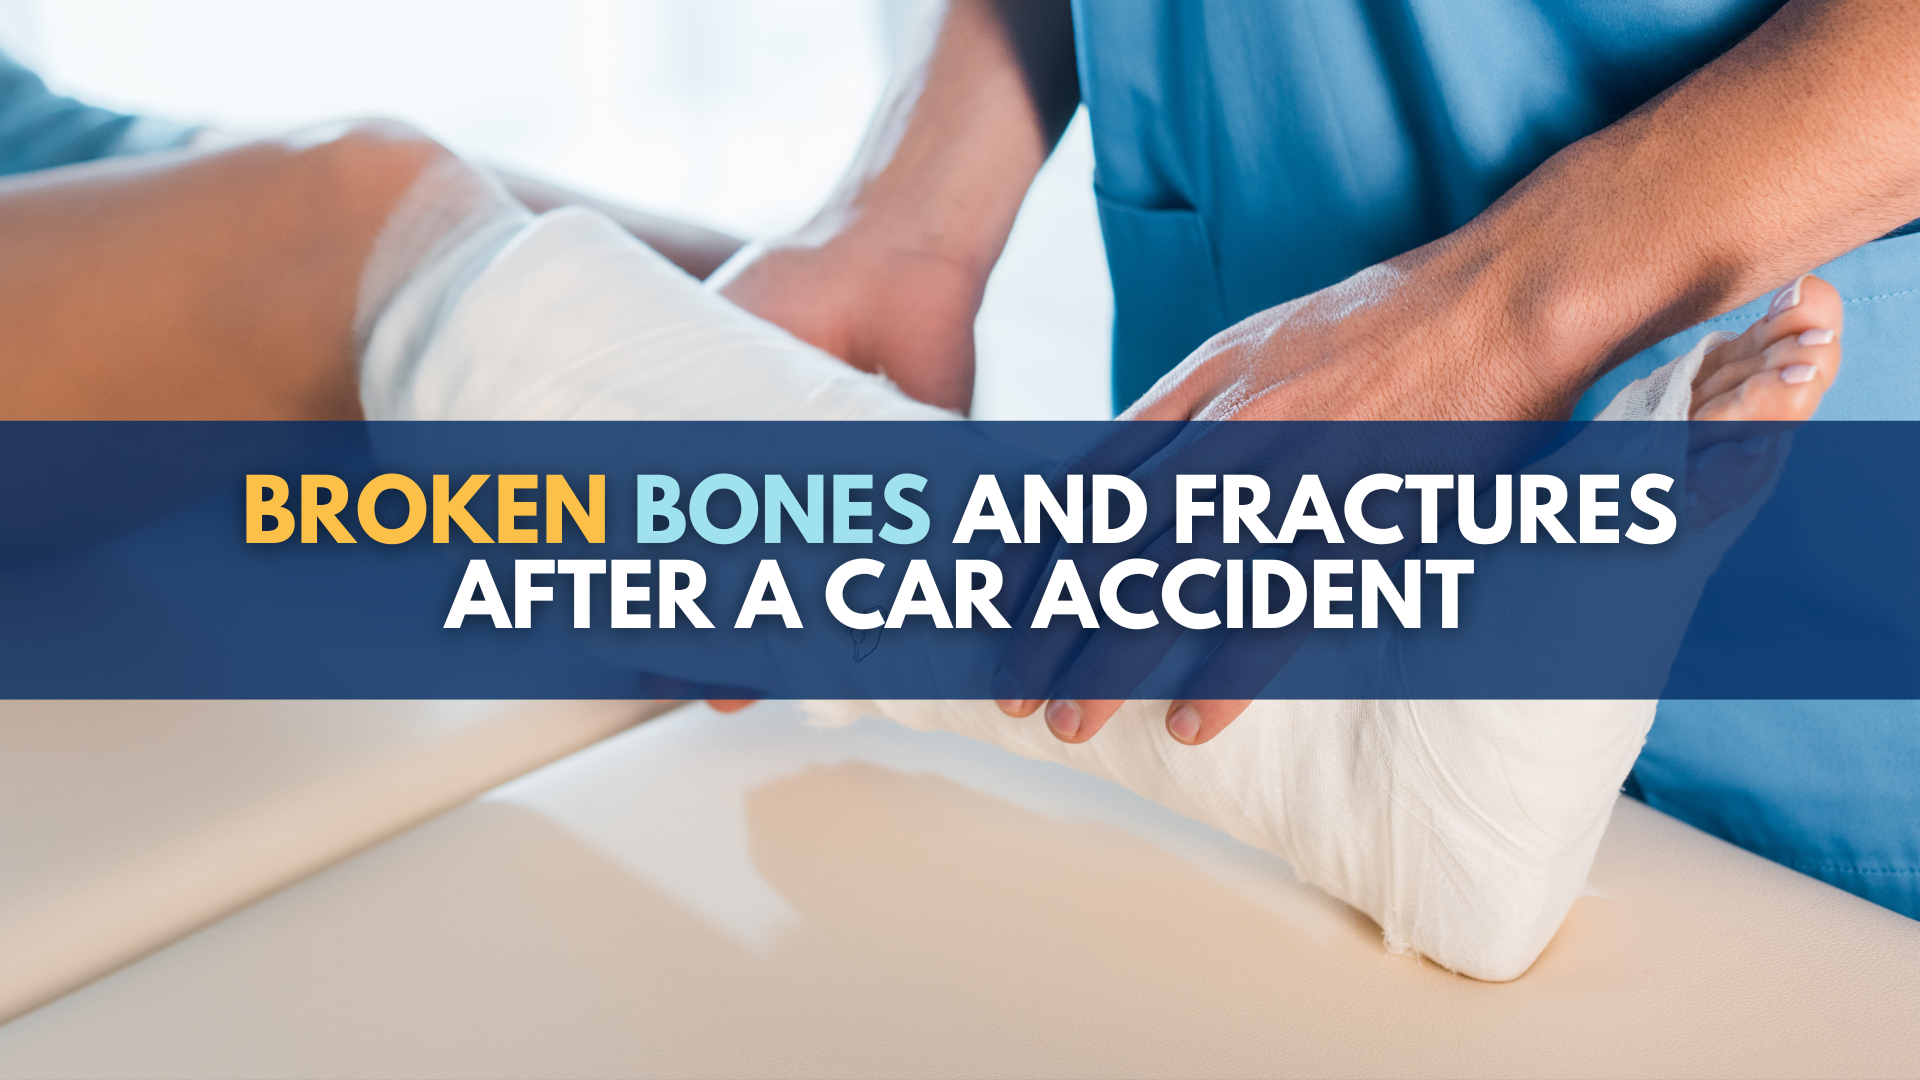 Broken bones and fractures after a car accident